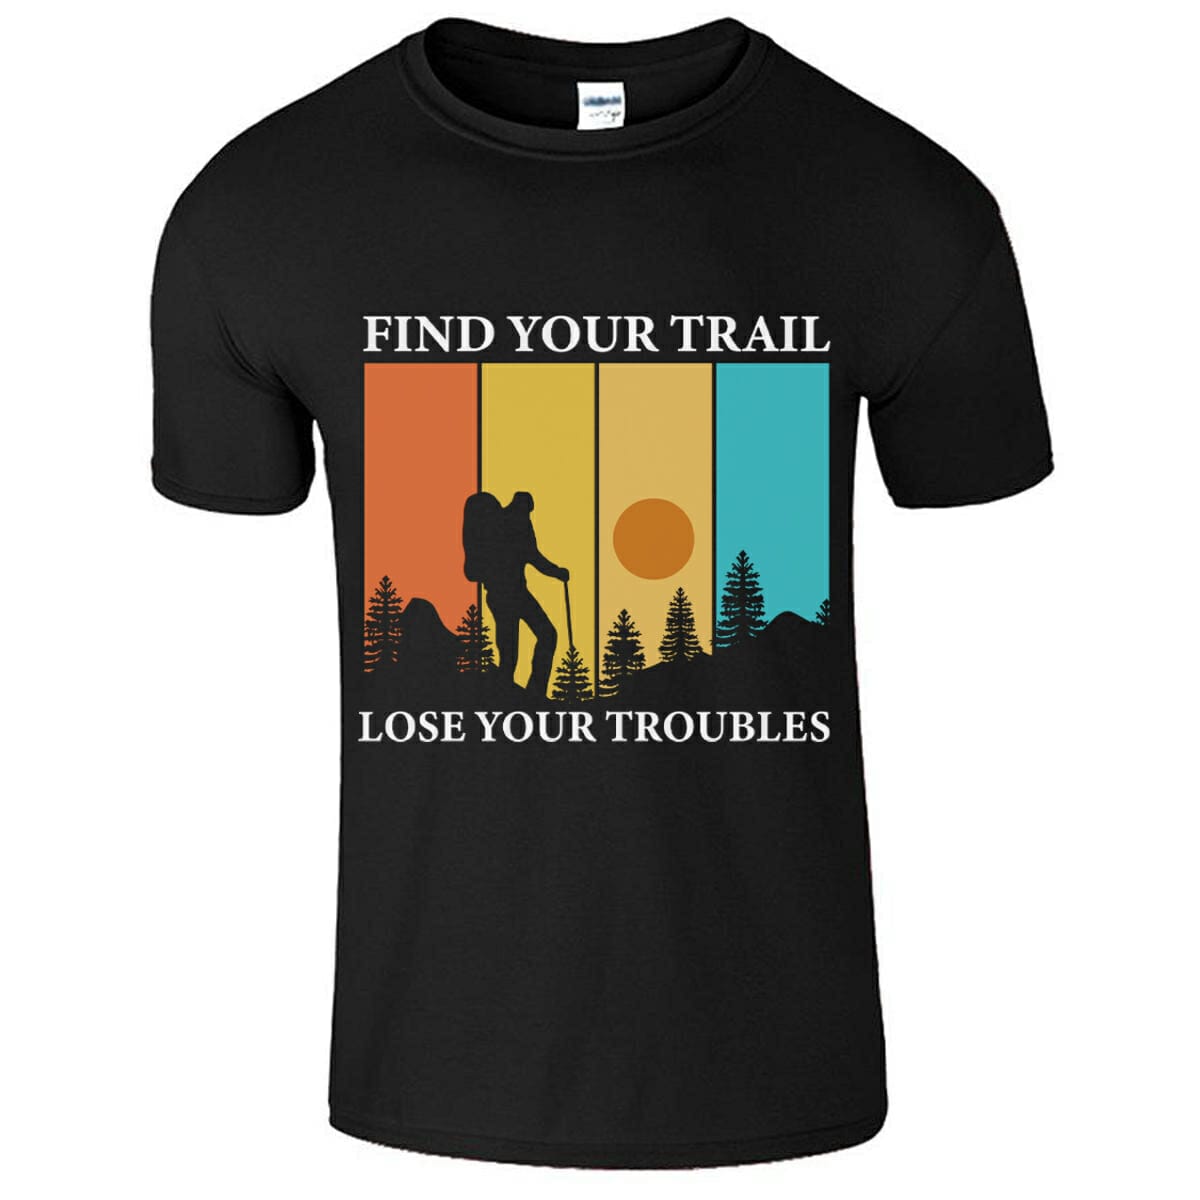 Find Your Trail Lose Your Troubles T-Shirt Design For Hiking